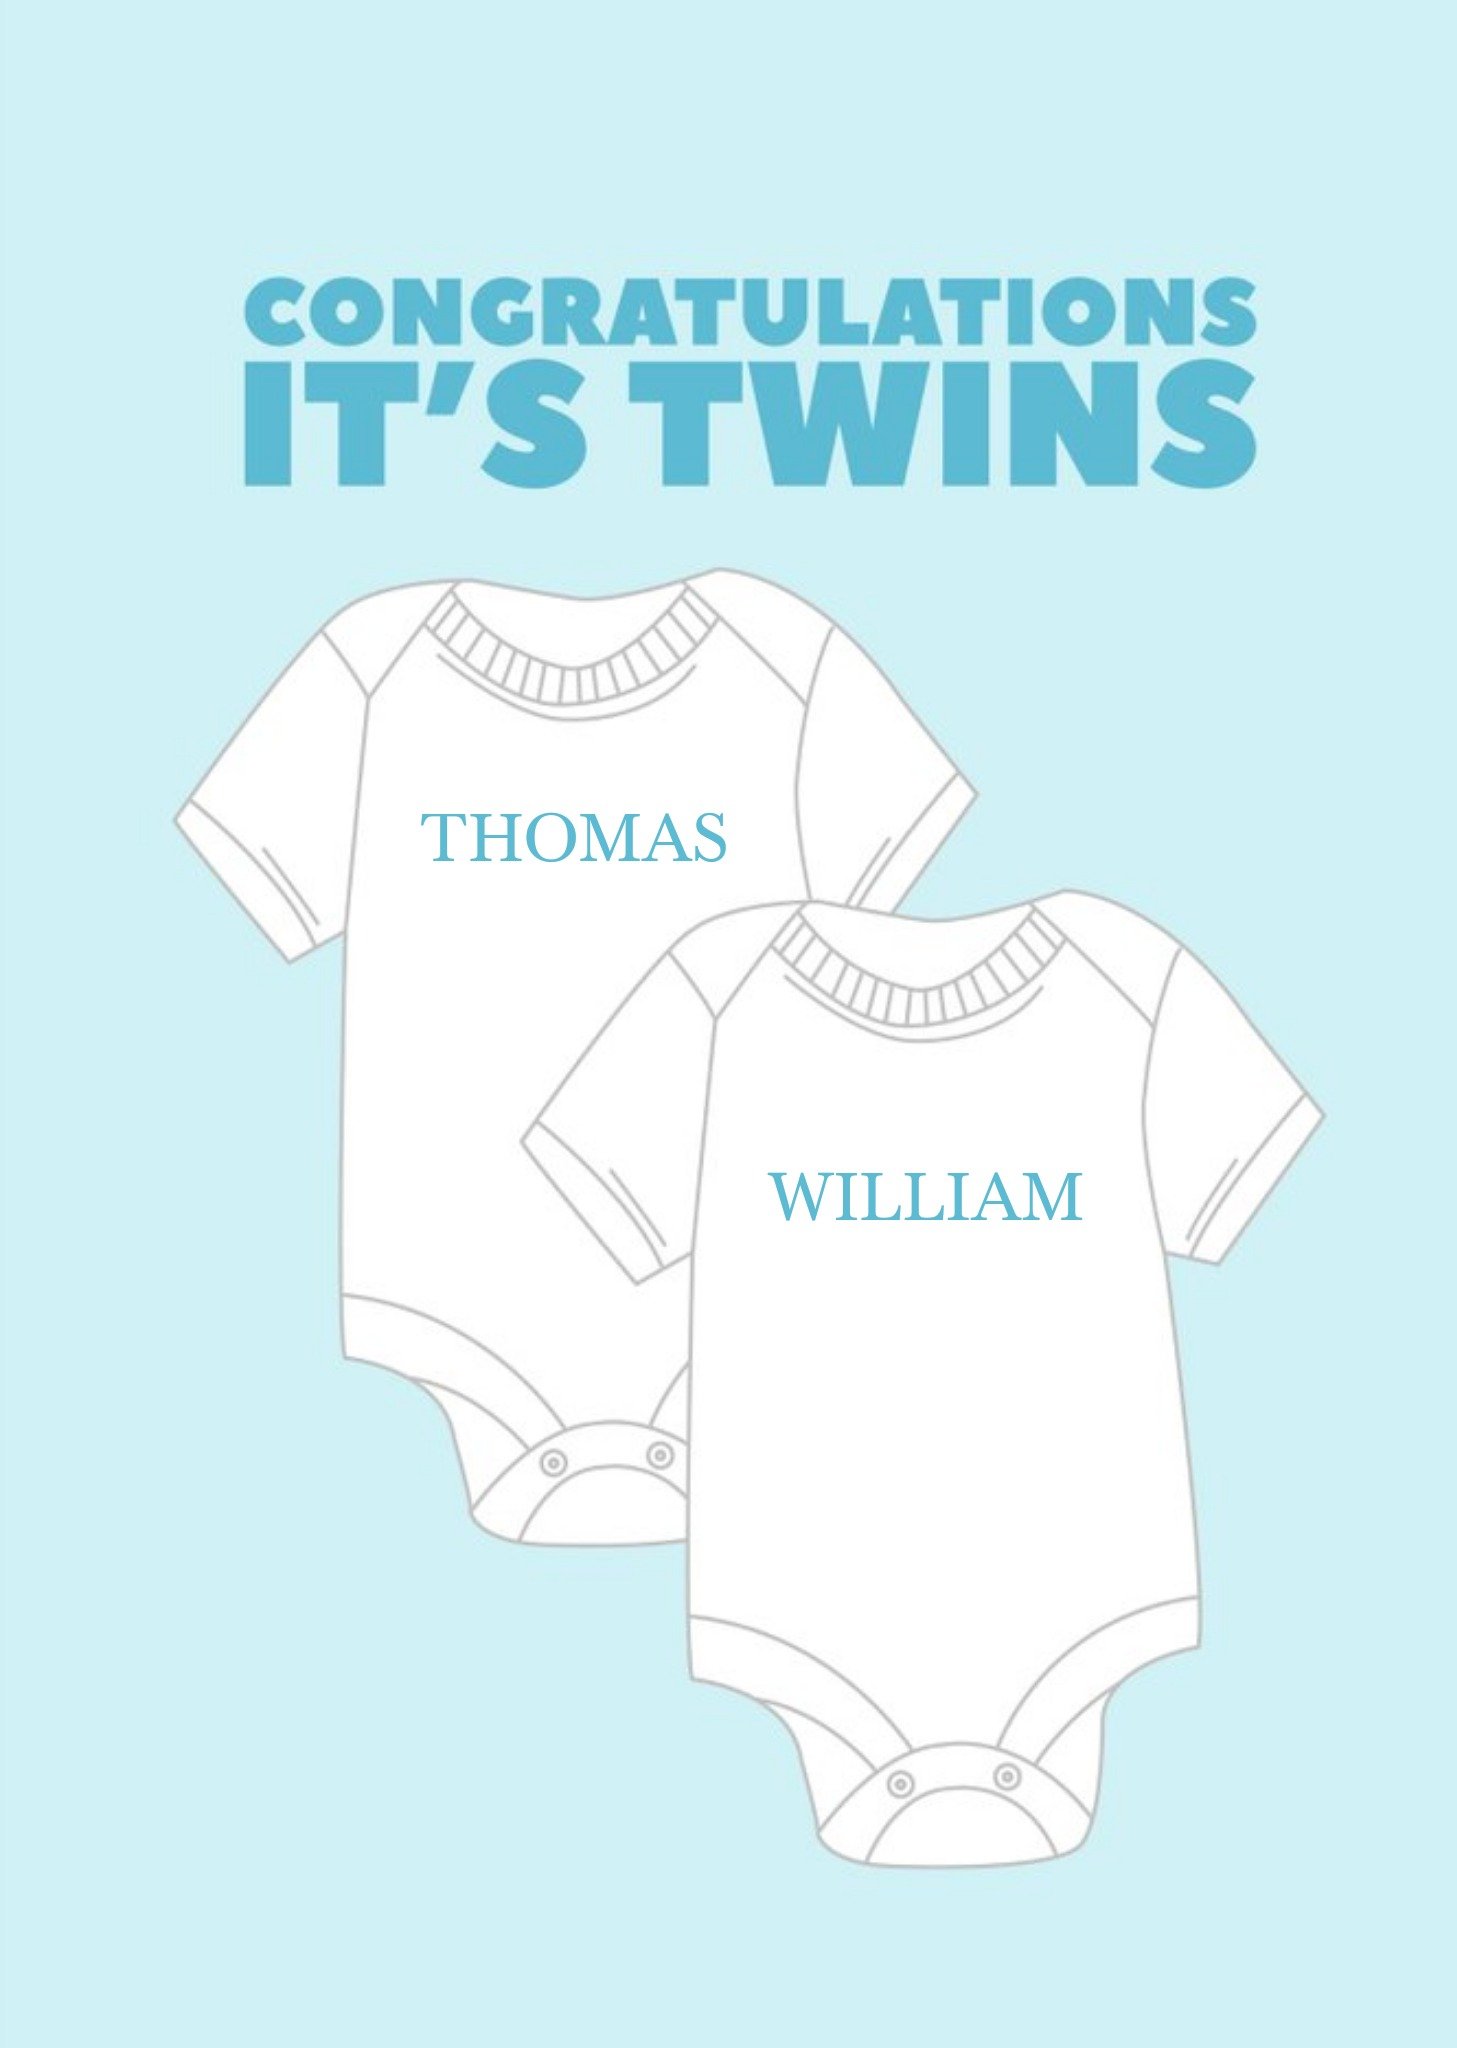 Moonpig Pearl And Ivy Illustrated Baby Grow Twins Congratulations Card Ecard